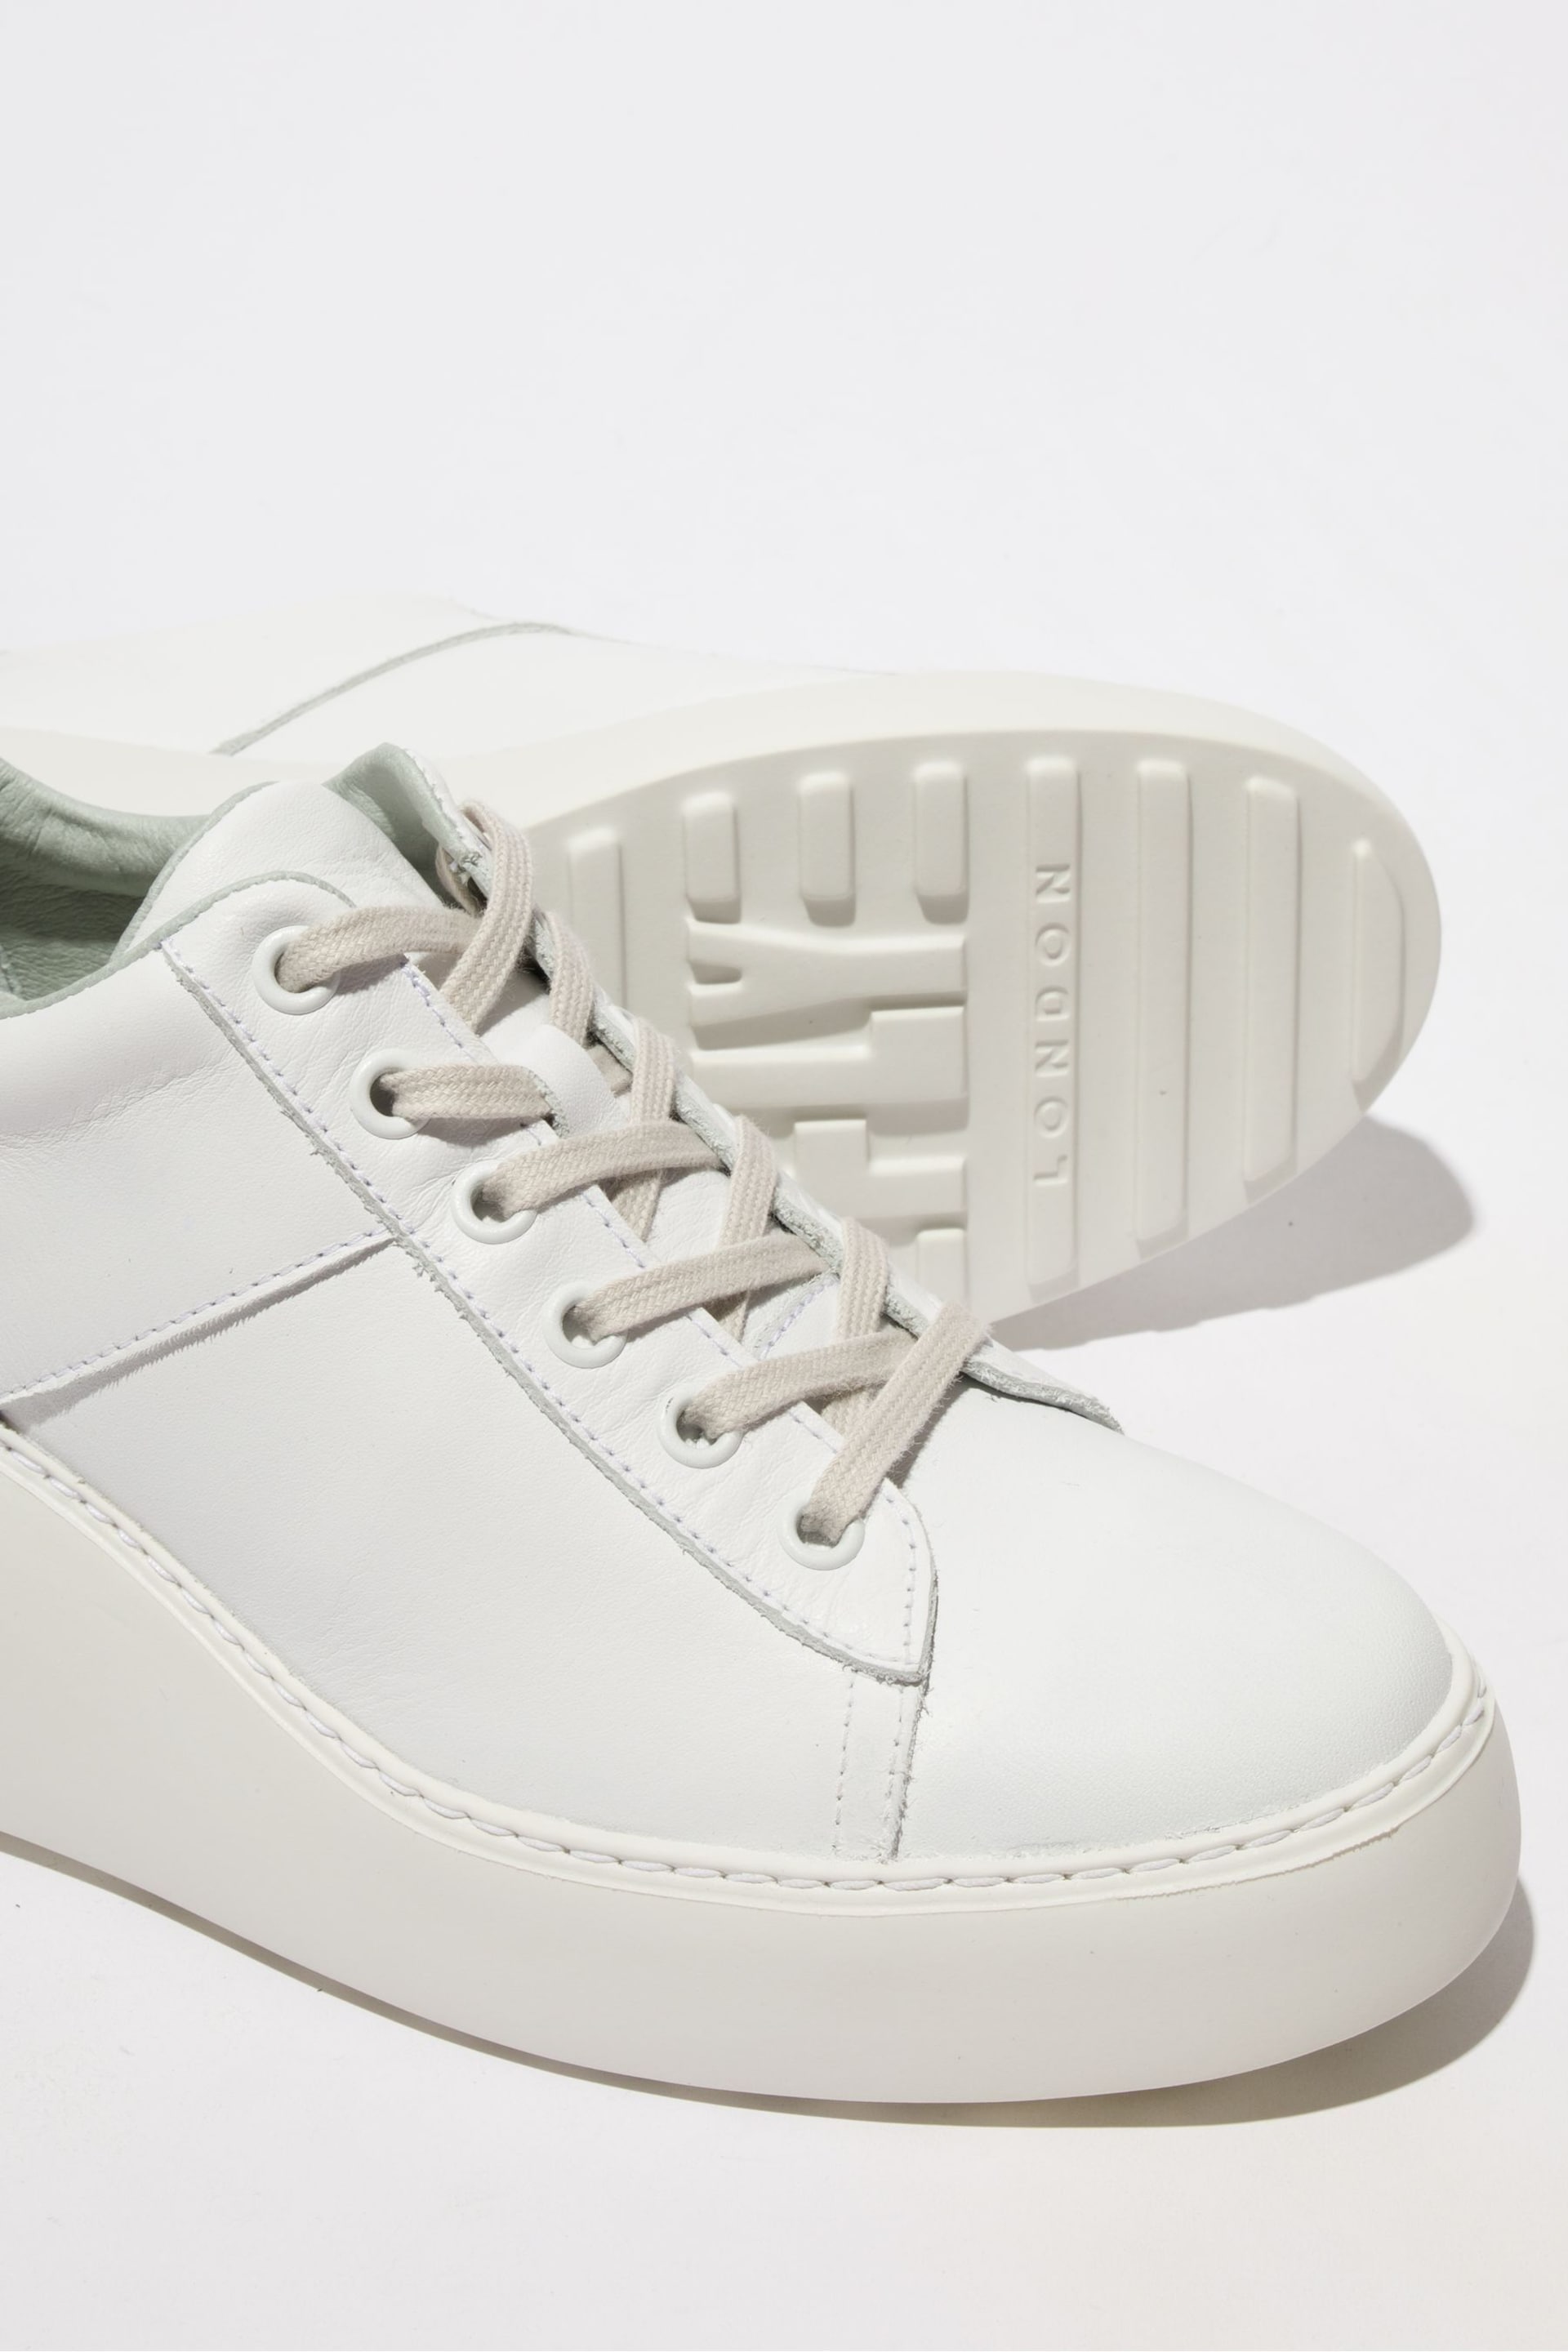 Fly London White Delf Wedge Trainers - Image 4 of 4